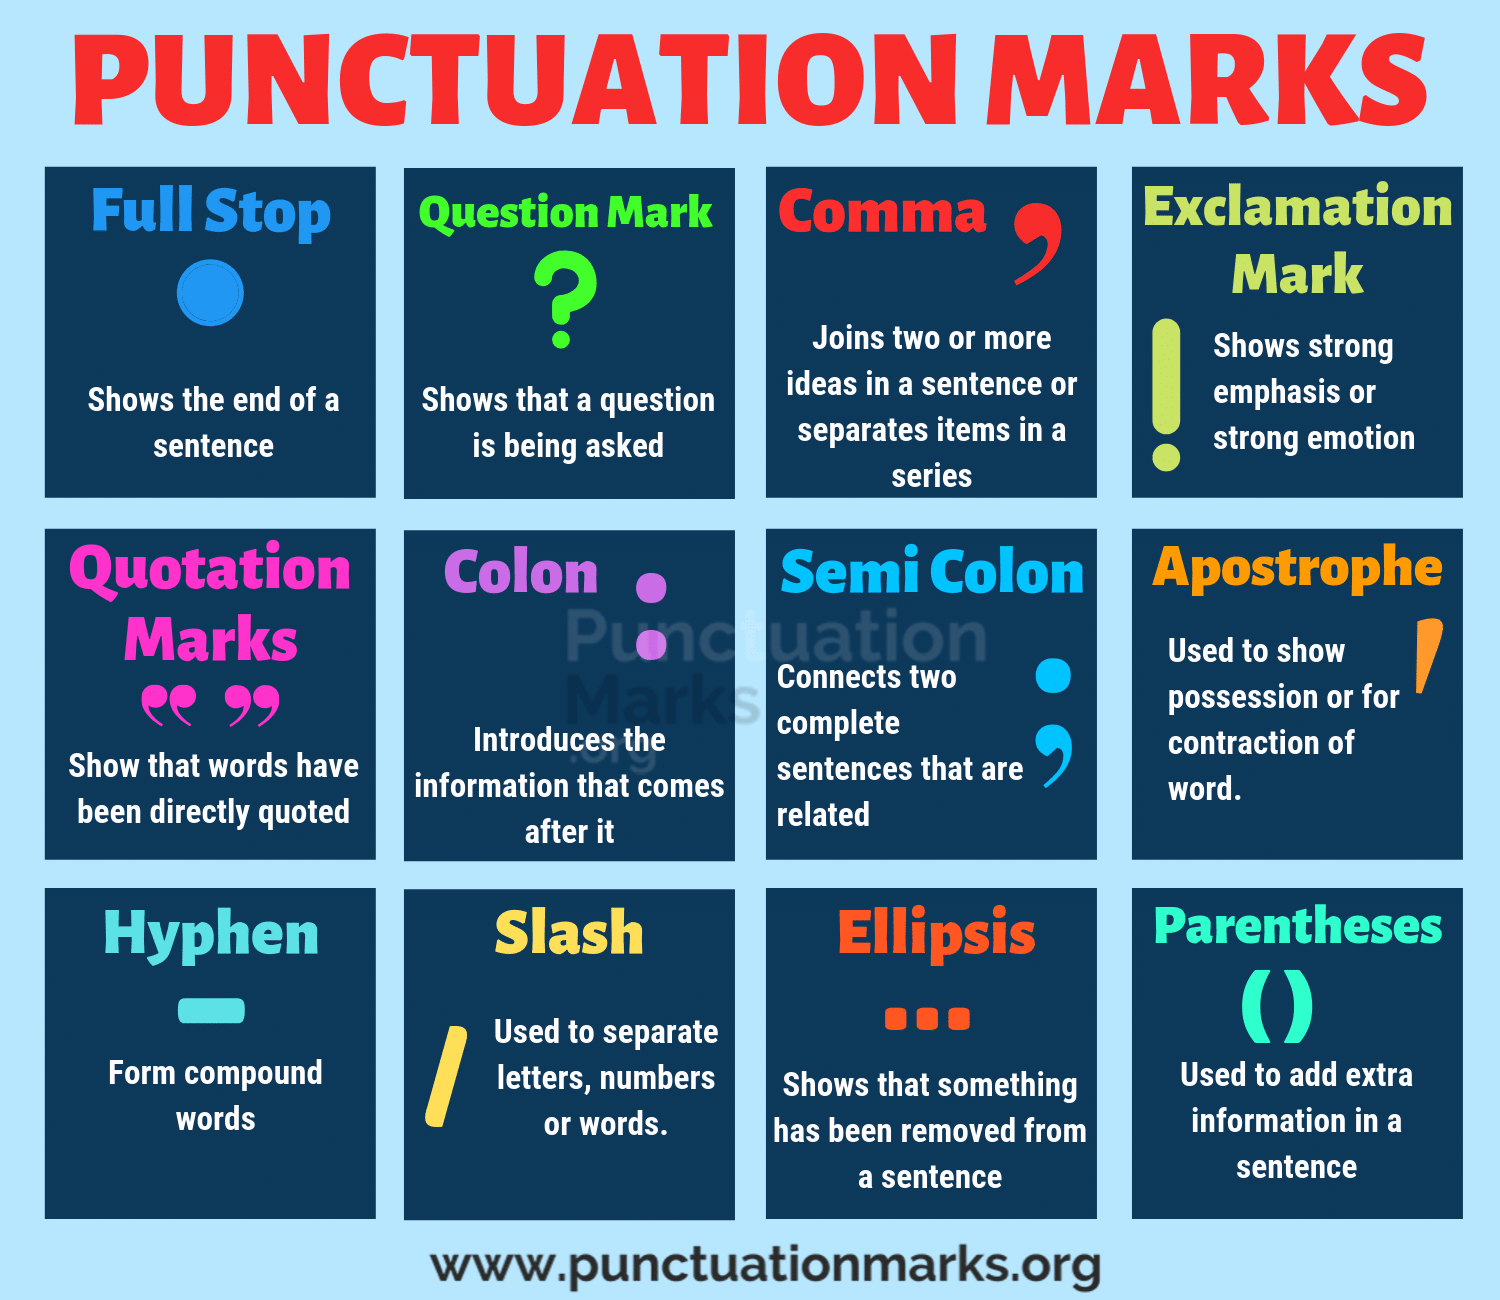 an infographic about punctuation marks